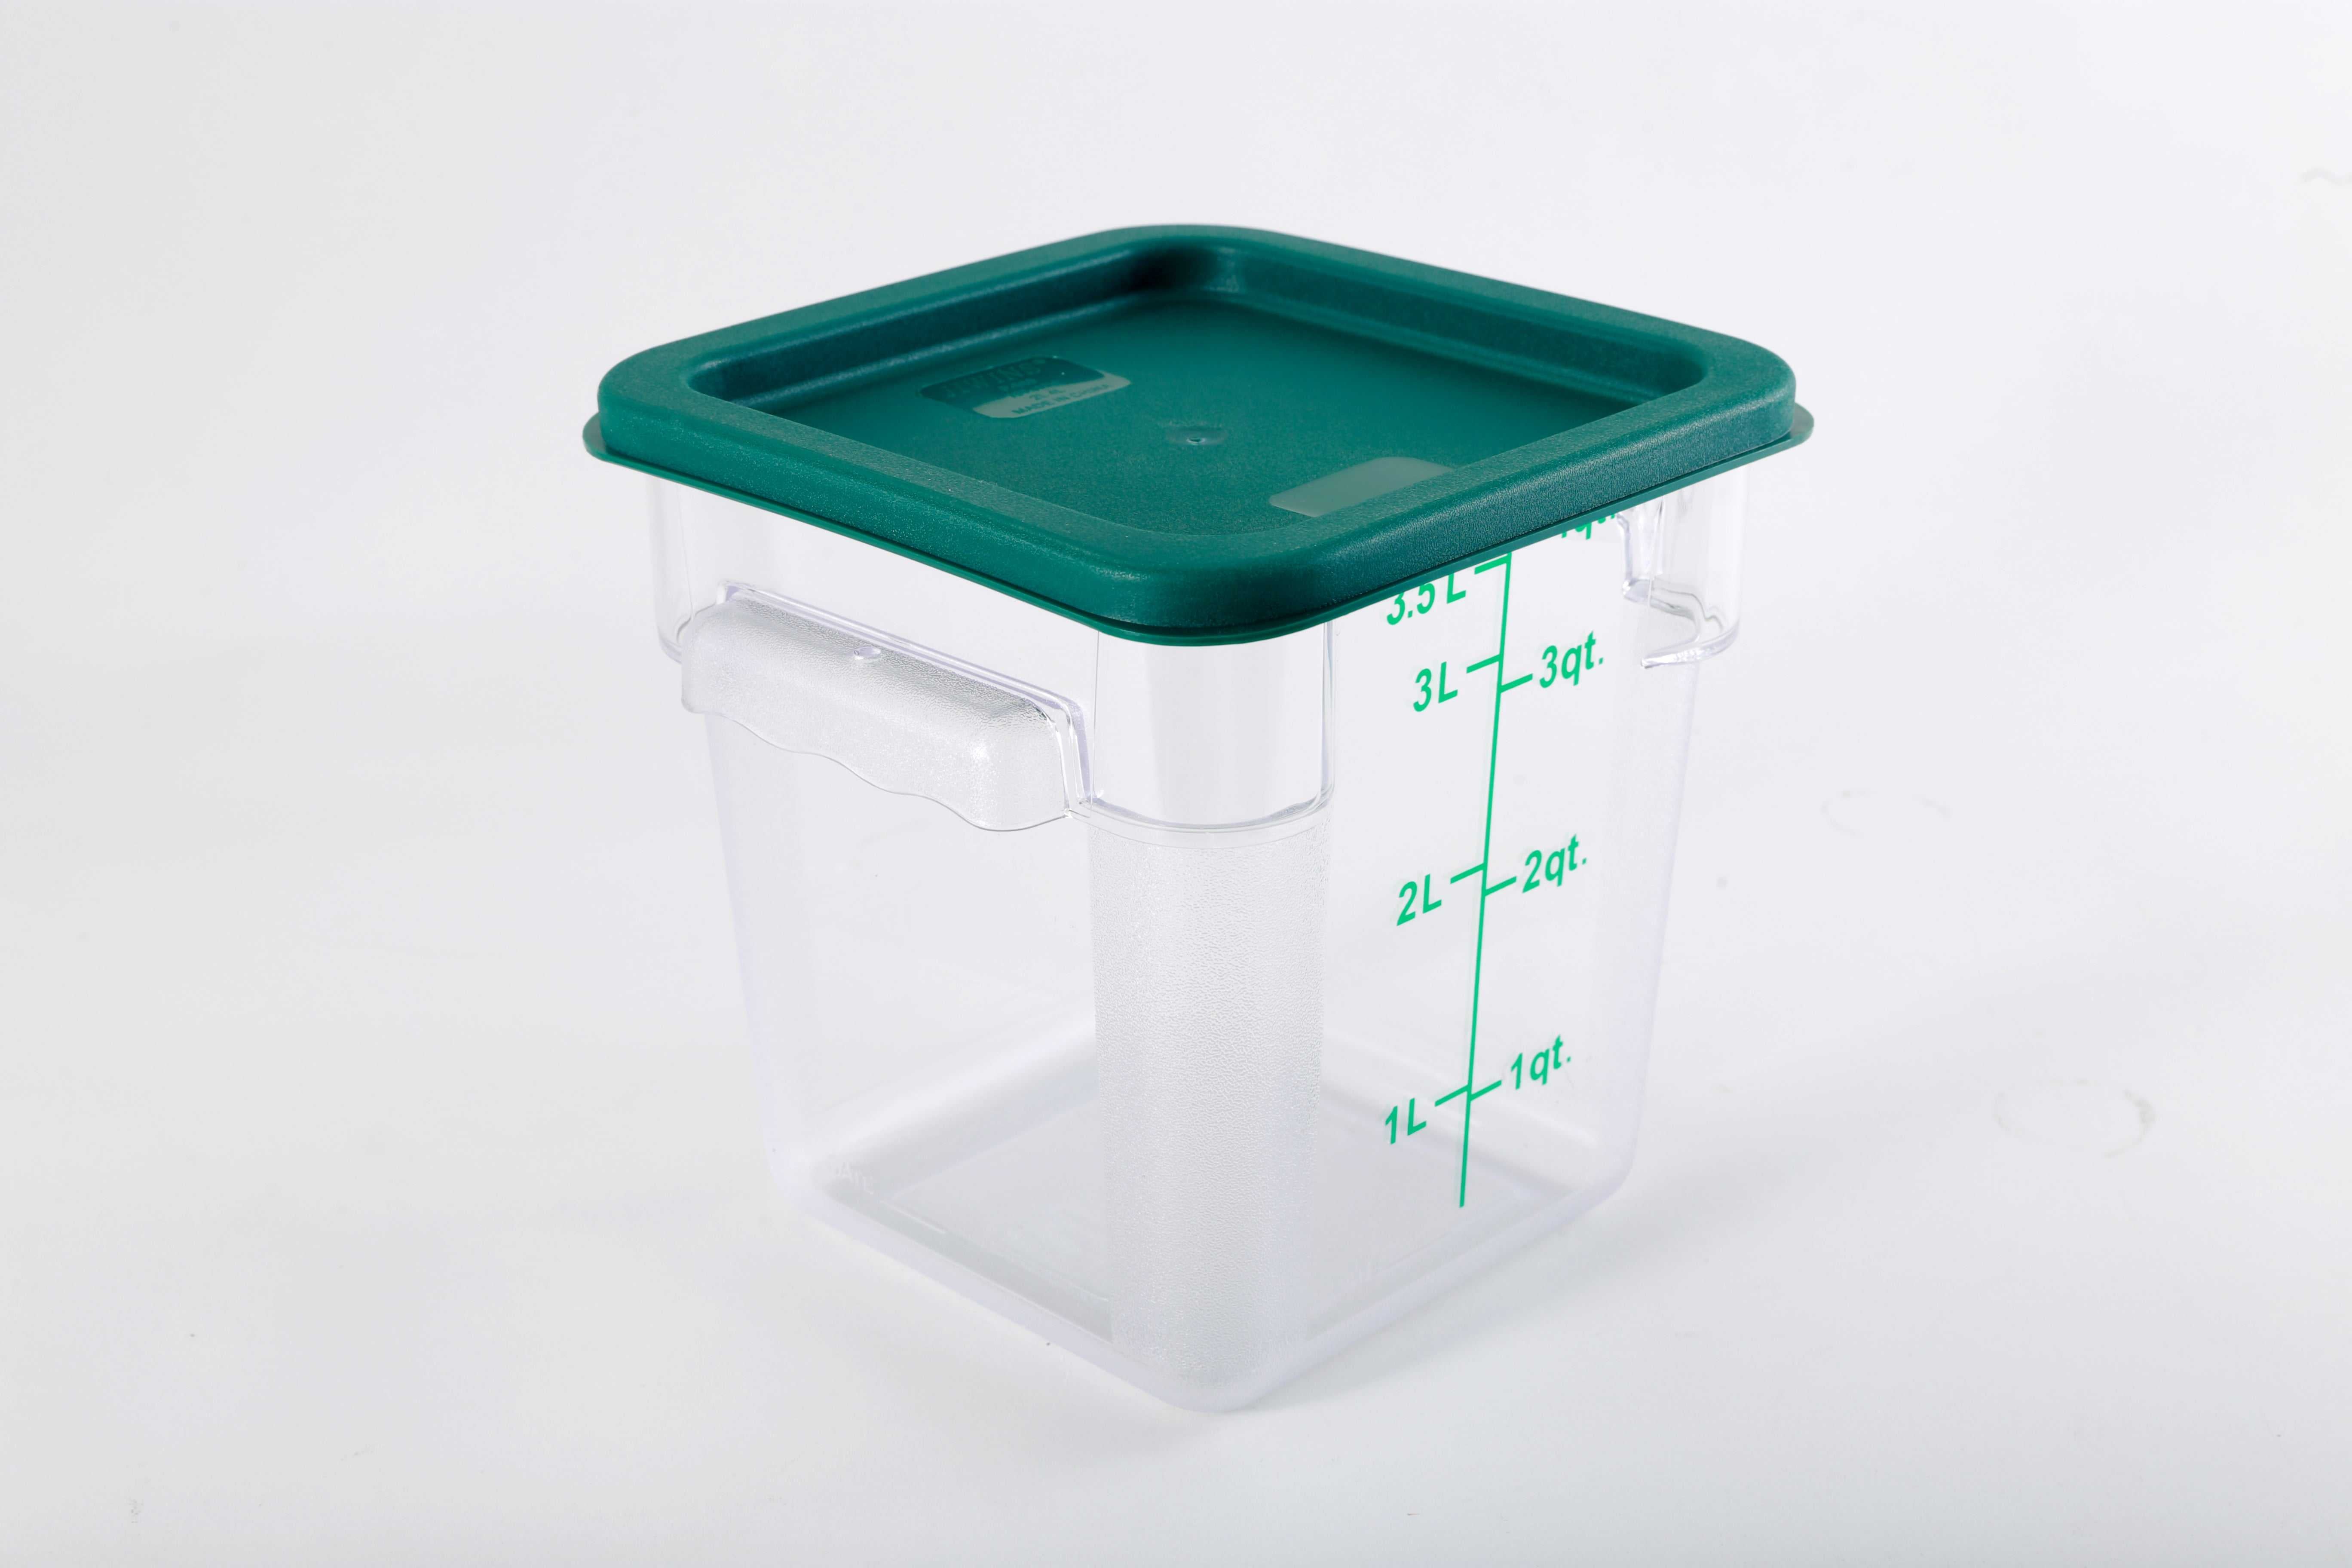 Hakka 4 Qt Commercial Grade Square Food Storage Containers with Lids,Polycarbonate,Clear - Case of 5